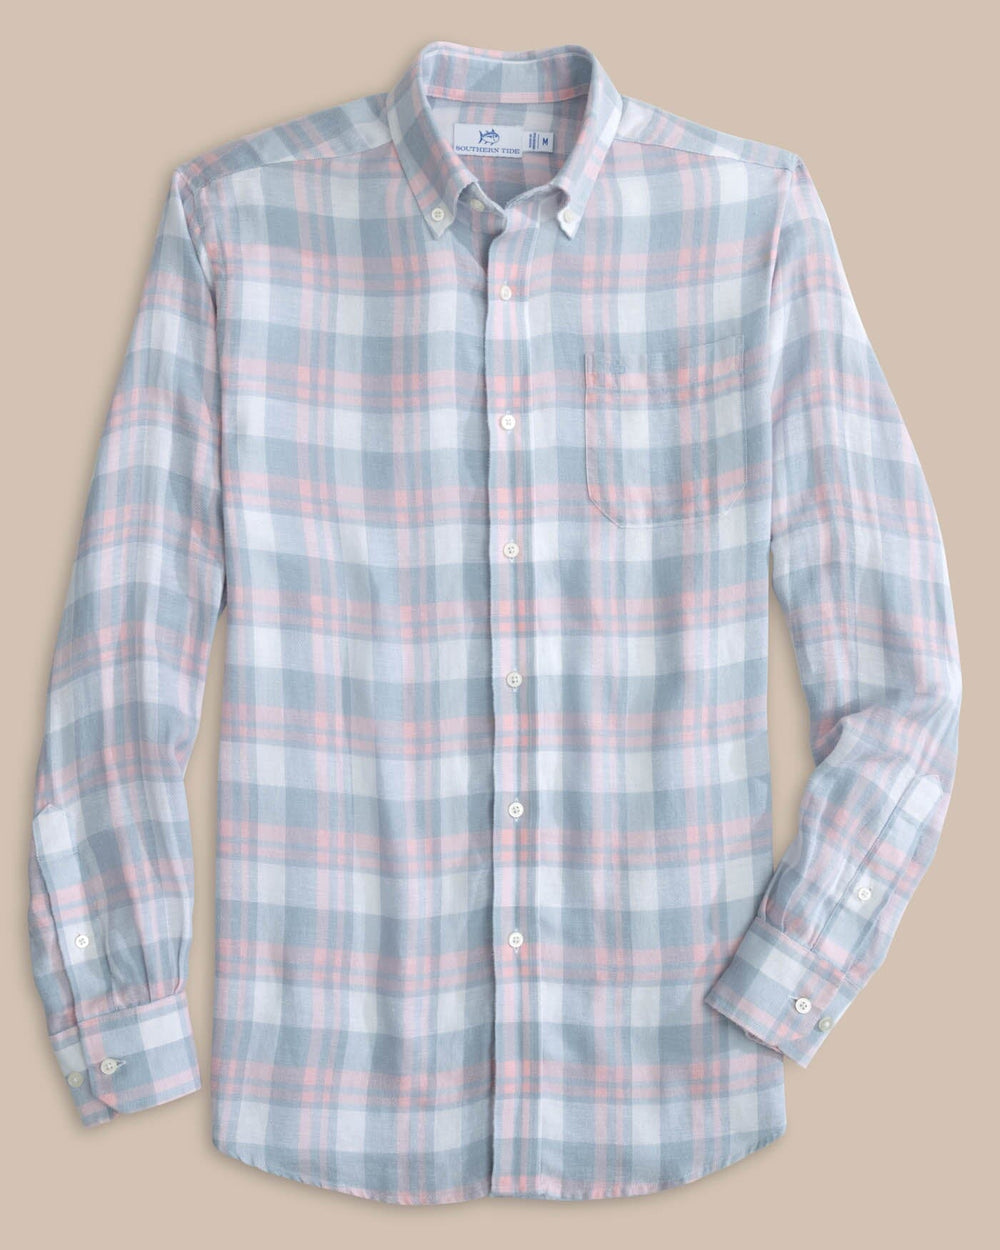 The front view of the Southern Tide Headland Reedy Plaid Long Sleeve Sport Shirt by Southern Tide - Tsunami Grey